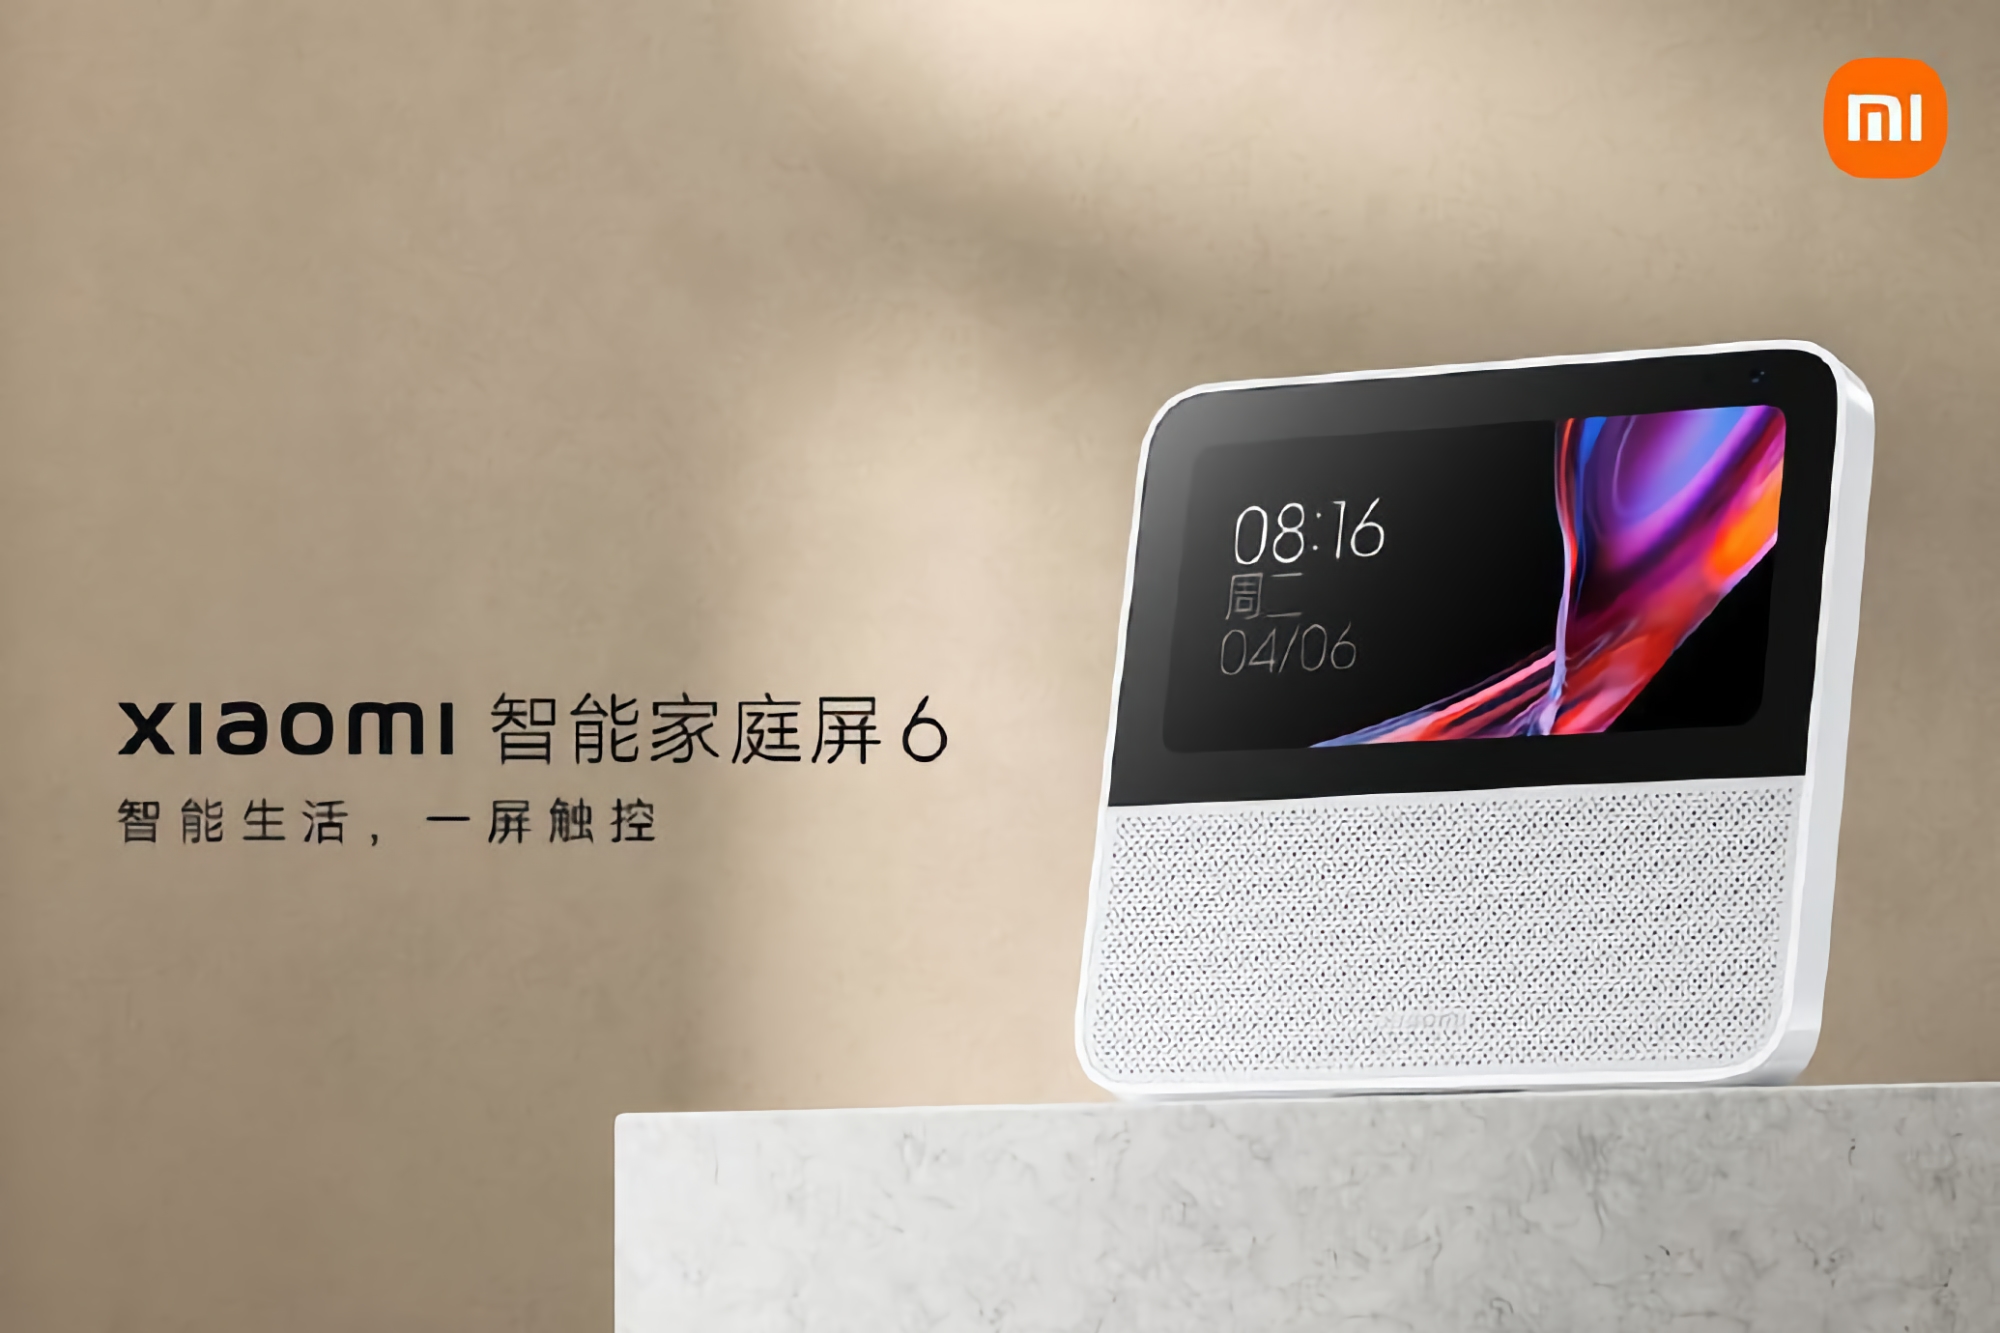 Xiaomi introduced the Smart Home Display 6: 6-inch display, 2 MP camera and built-in voice assistant for $52